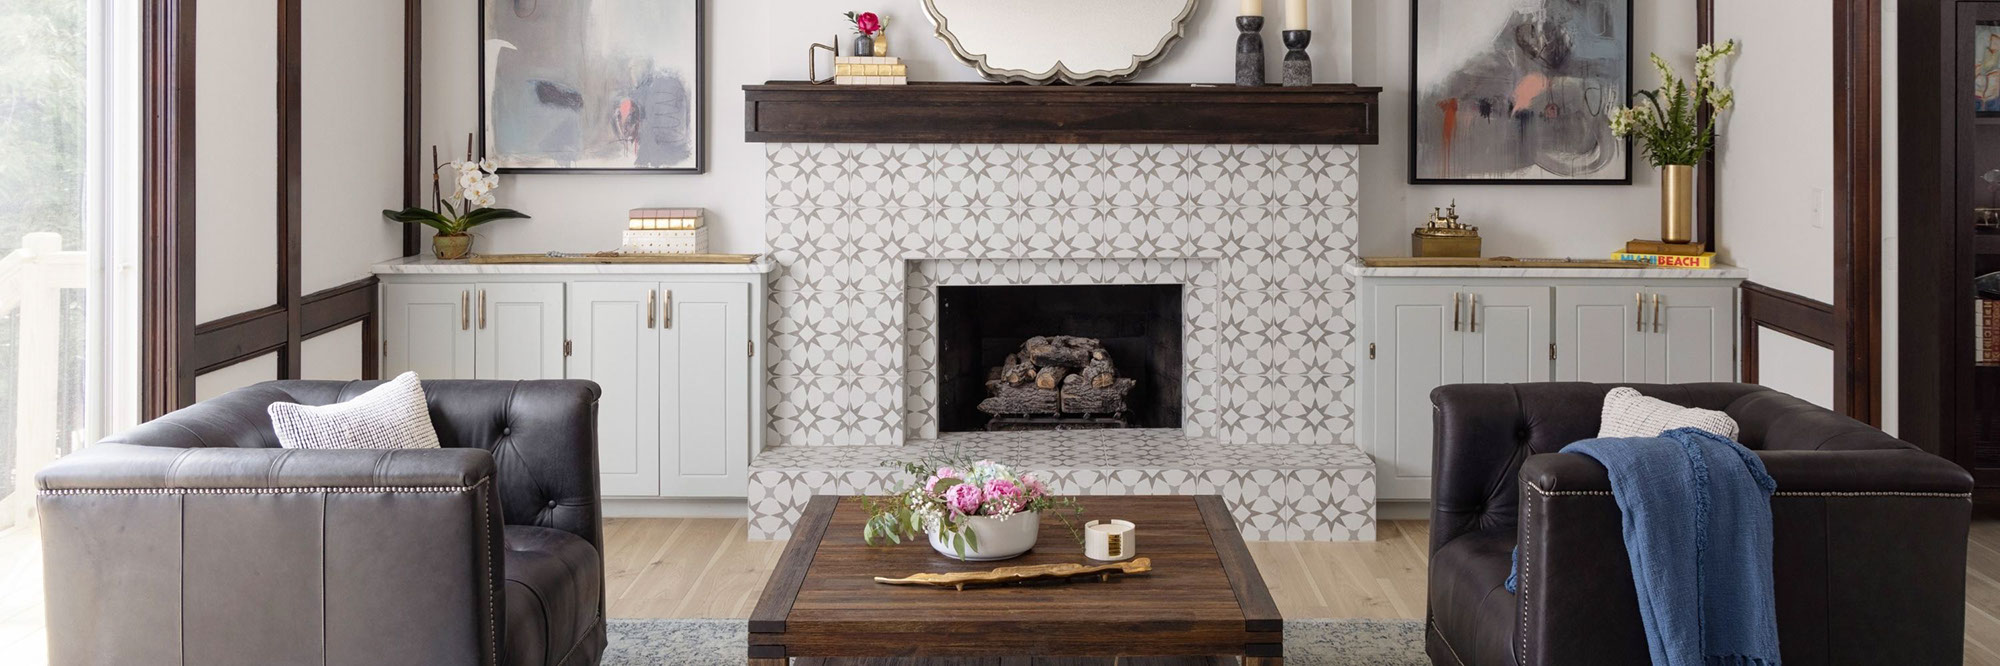 Renovated living room with fireplace façade and hearth of off-white, light gray, and dark gray encaustic tile, dark wood mantel, and off-white built-in cabinets.